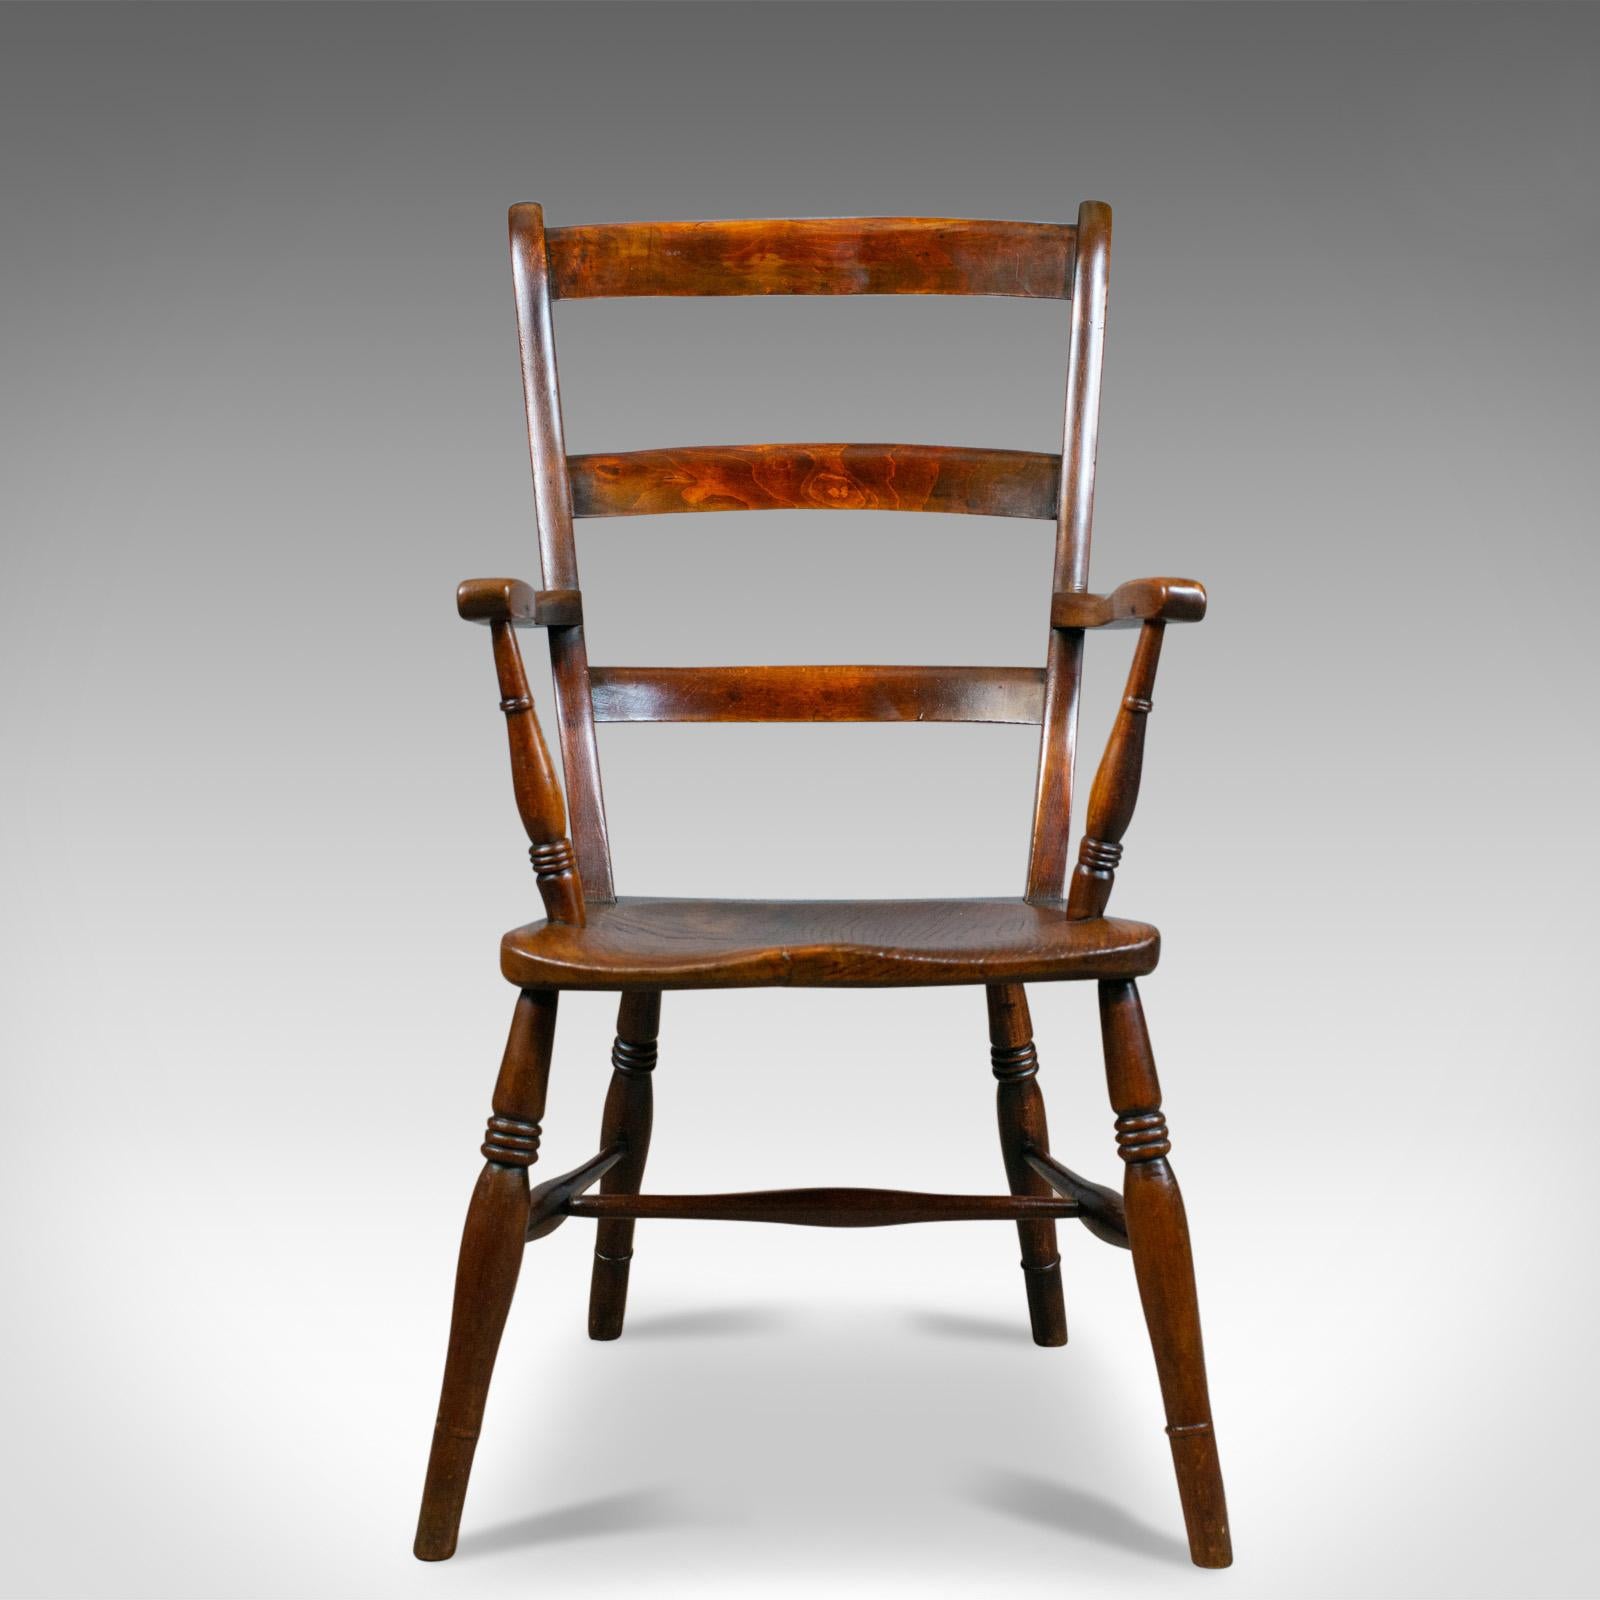 This is an antique Oxford elbow chair. A Victorian, country kitchen, Windsor, lath back, armchair in elm and beech, dating to the mid-19th century, circa 1850.

Super chair in Fine order throughout
Classic, flared lath back, raked for